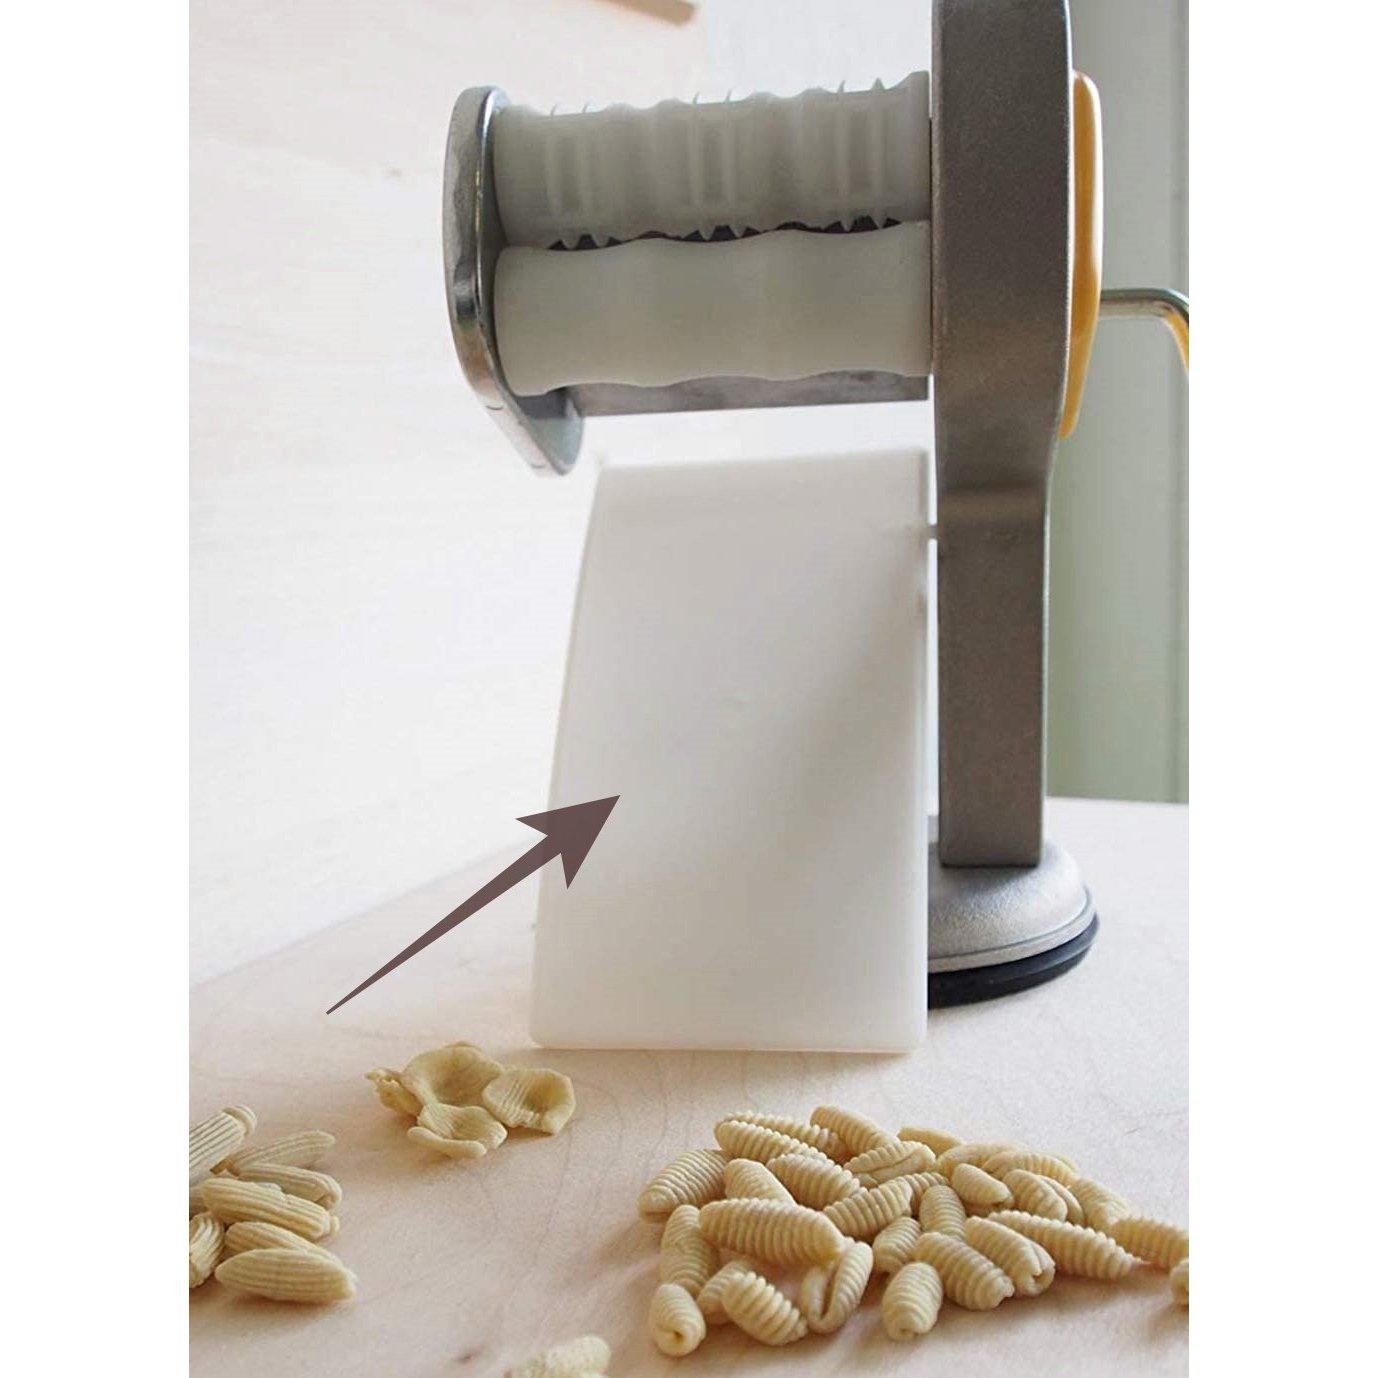 How to make home made cavatelli pasta with Consiglio's cavatelli maker, Our best selling wooden roller cavatelli pasta maker is back in stock., By  Consiglio's Kitchenware & Gift